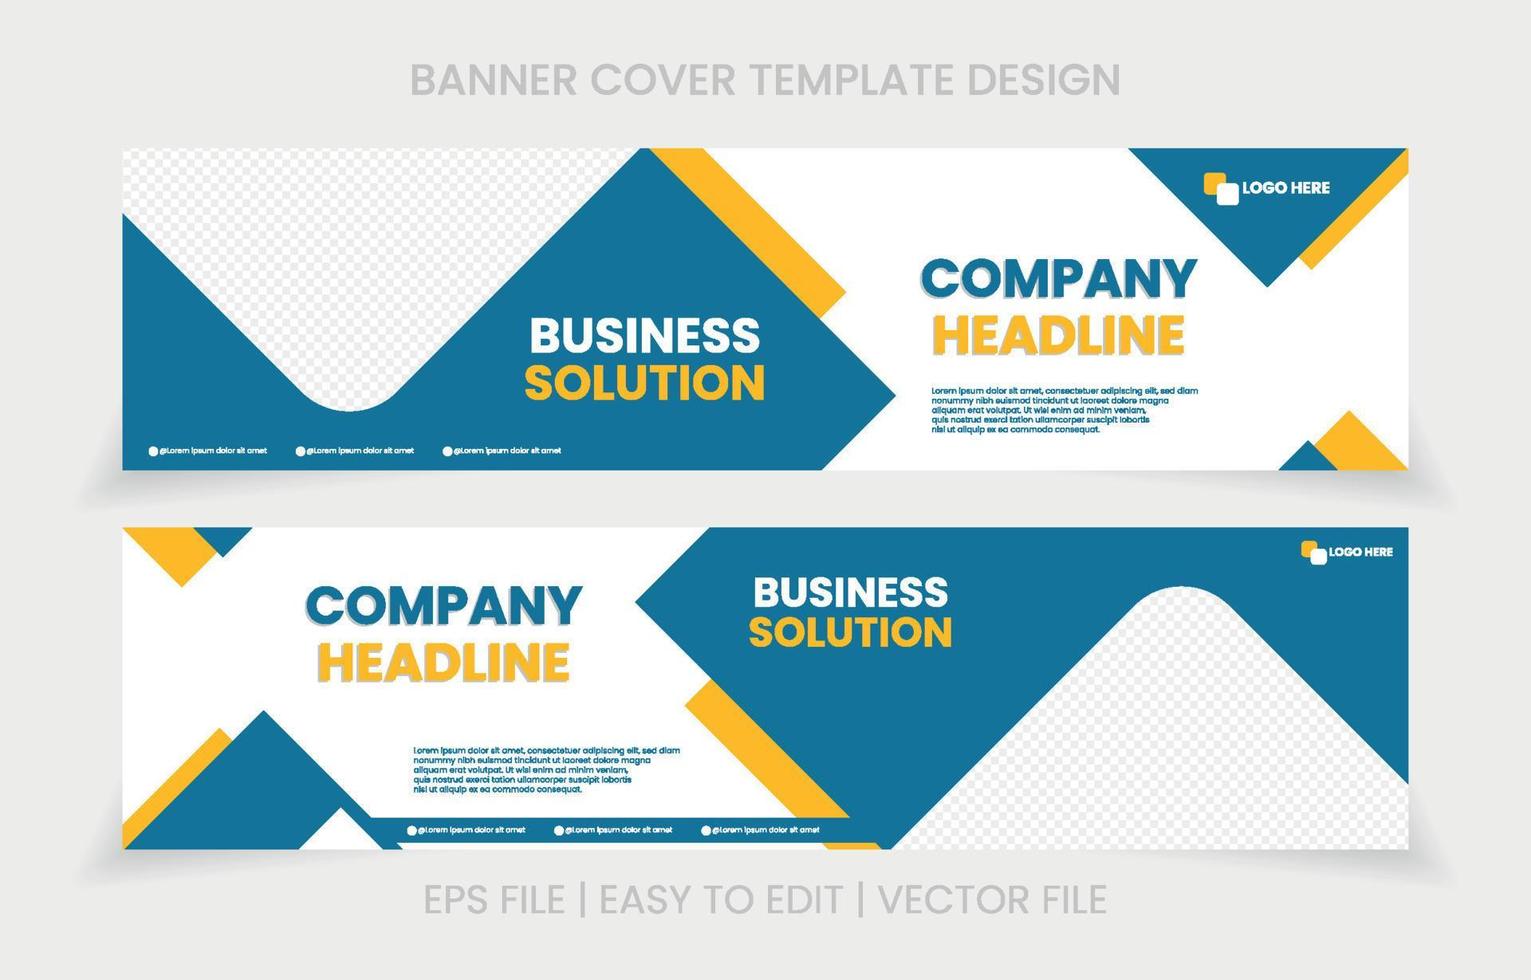 company cover banner social media vector background design professional business purpose